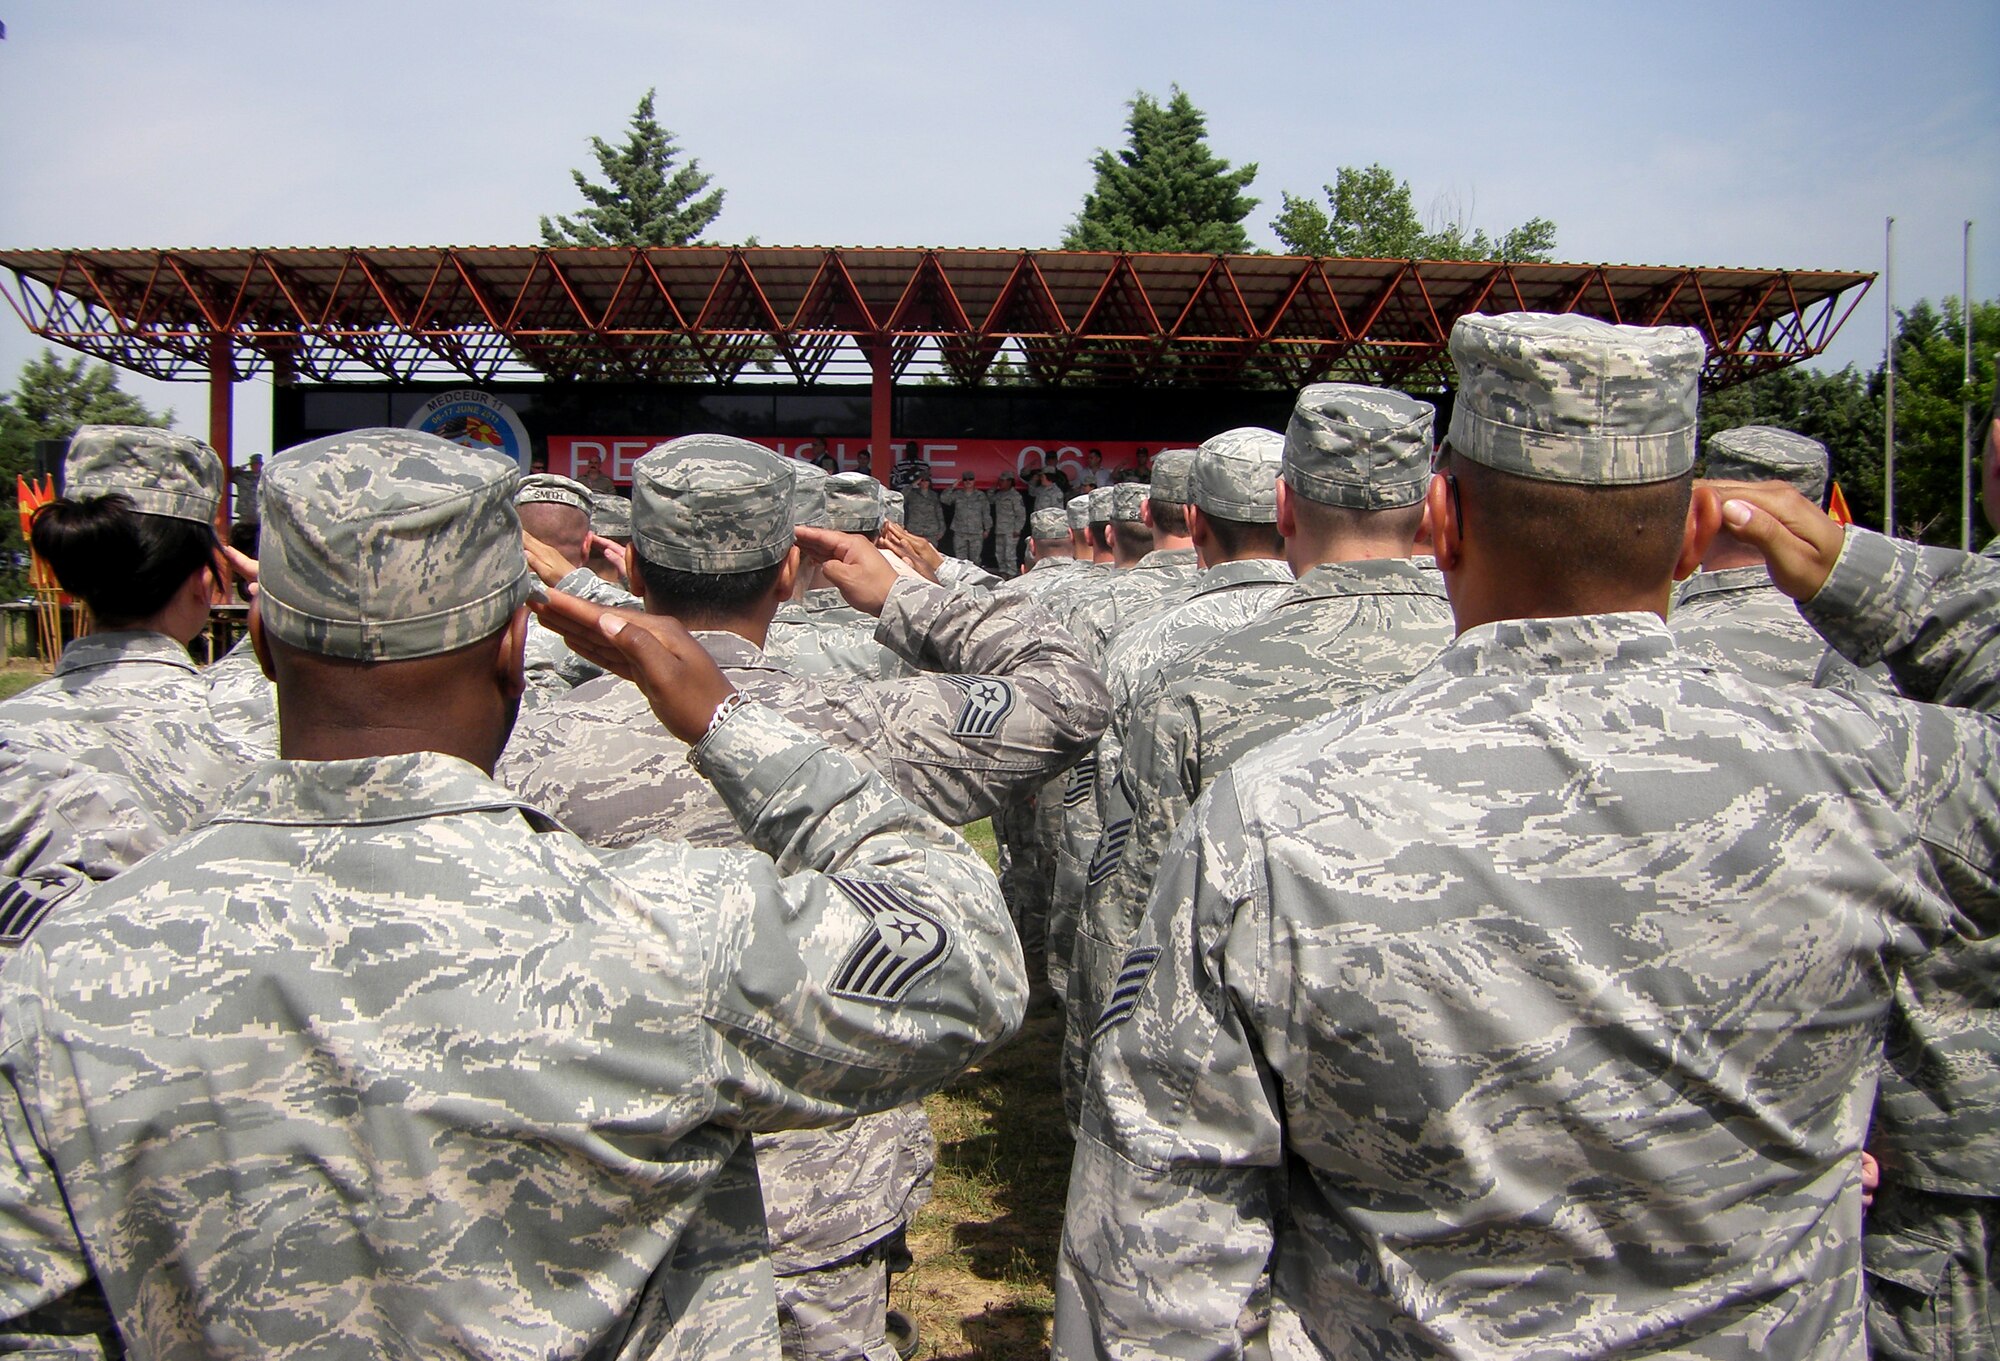 CAMP PEPELISHTE, Macedonia -- Members of the U.S. Air Force and Army salute during the Macedonian and American National Anthems at the opening ceremony of Medical Training Exercise in Central and Eastern Europe 2011 here June 6. The countries participating in this year’s MEDCEUR are Macedonia, Montenegro, Bosnia and Herzegovina, Serbia, Slovenia, Norway and the United States. MEDCEUR is a Partnership for Peace and chairman of the Joint Chiefs of Staff-sponsored regional and multilateral exercise in Central and Eastern Europe designed to provide medical training and operational experience in a deployed environment.  (U.S. Air Force photo/Master Sgt. Kelley J. Stewart)